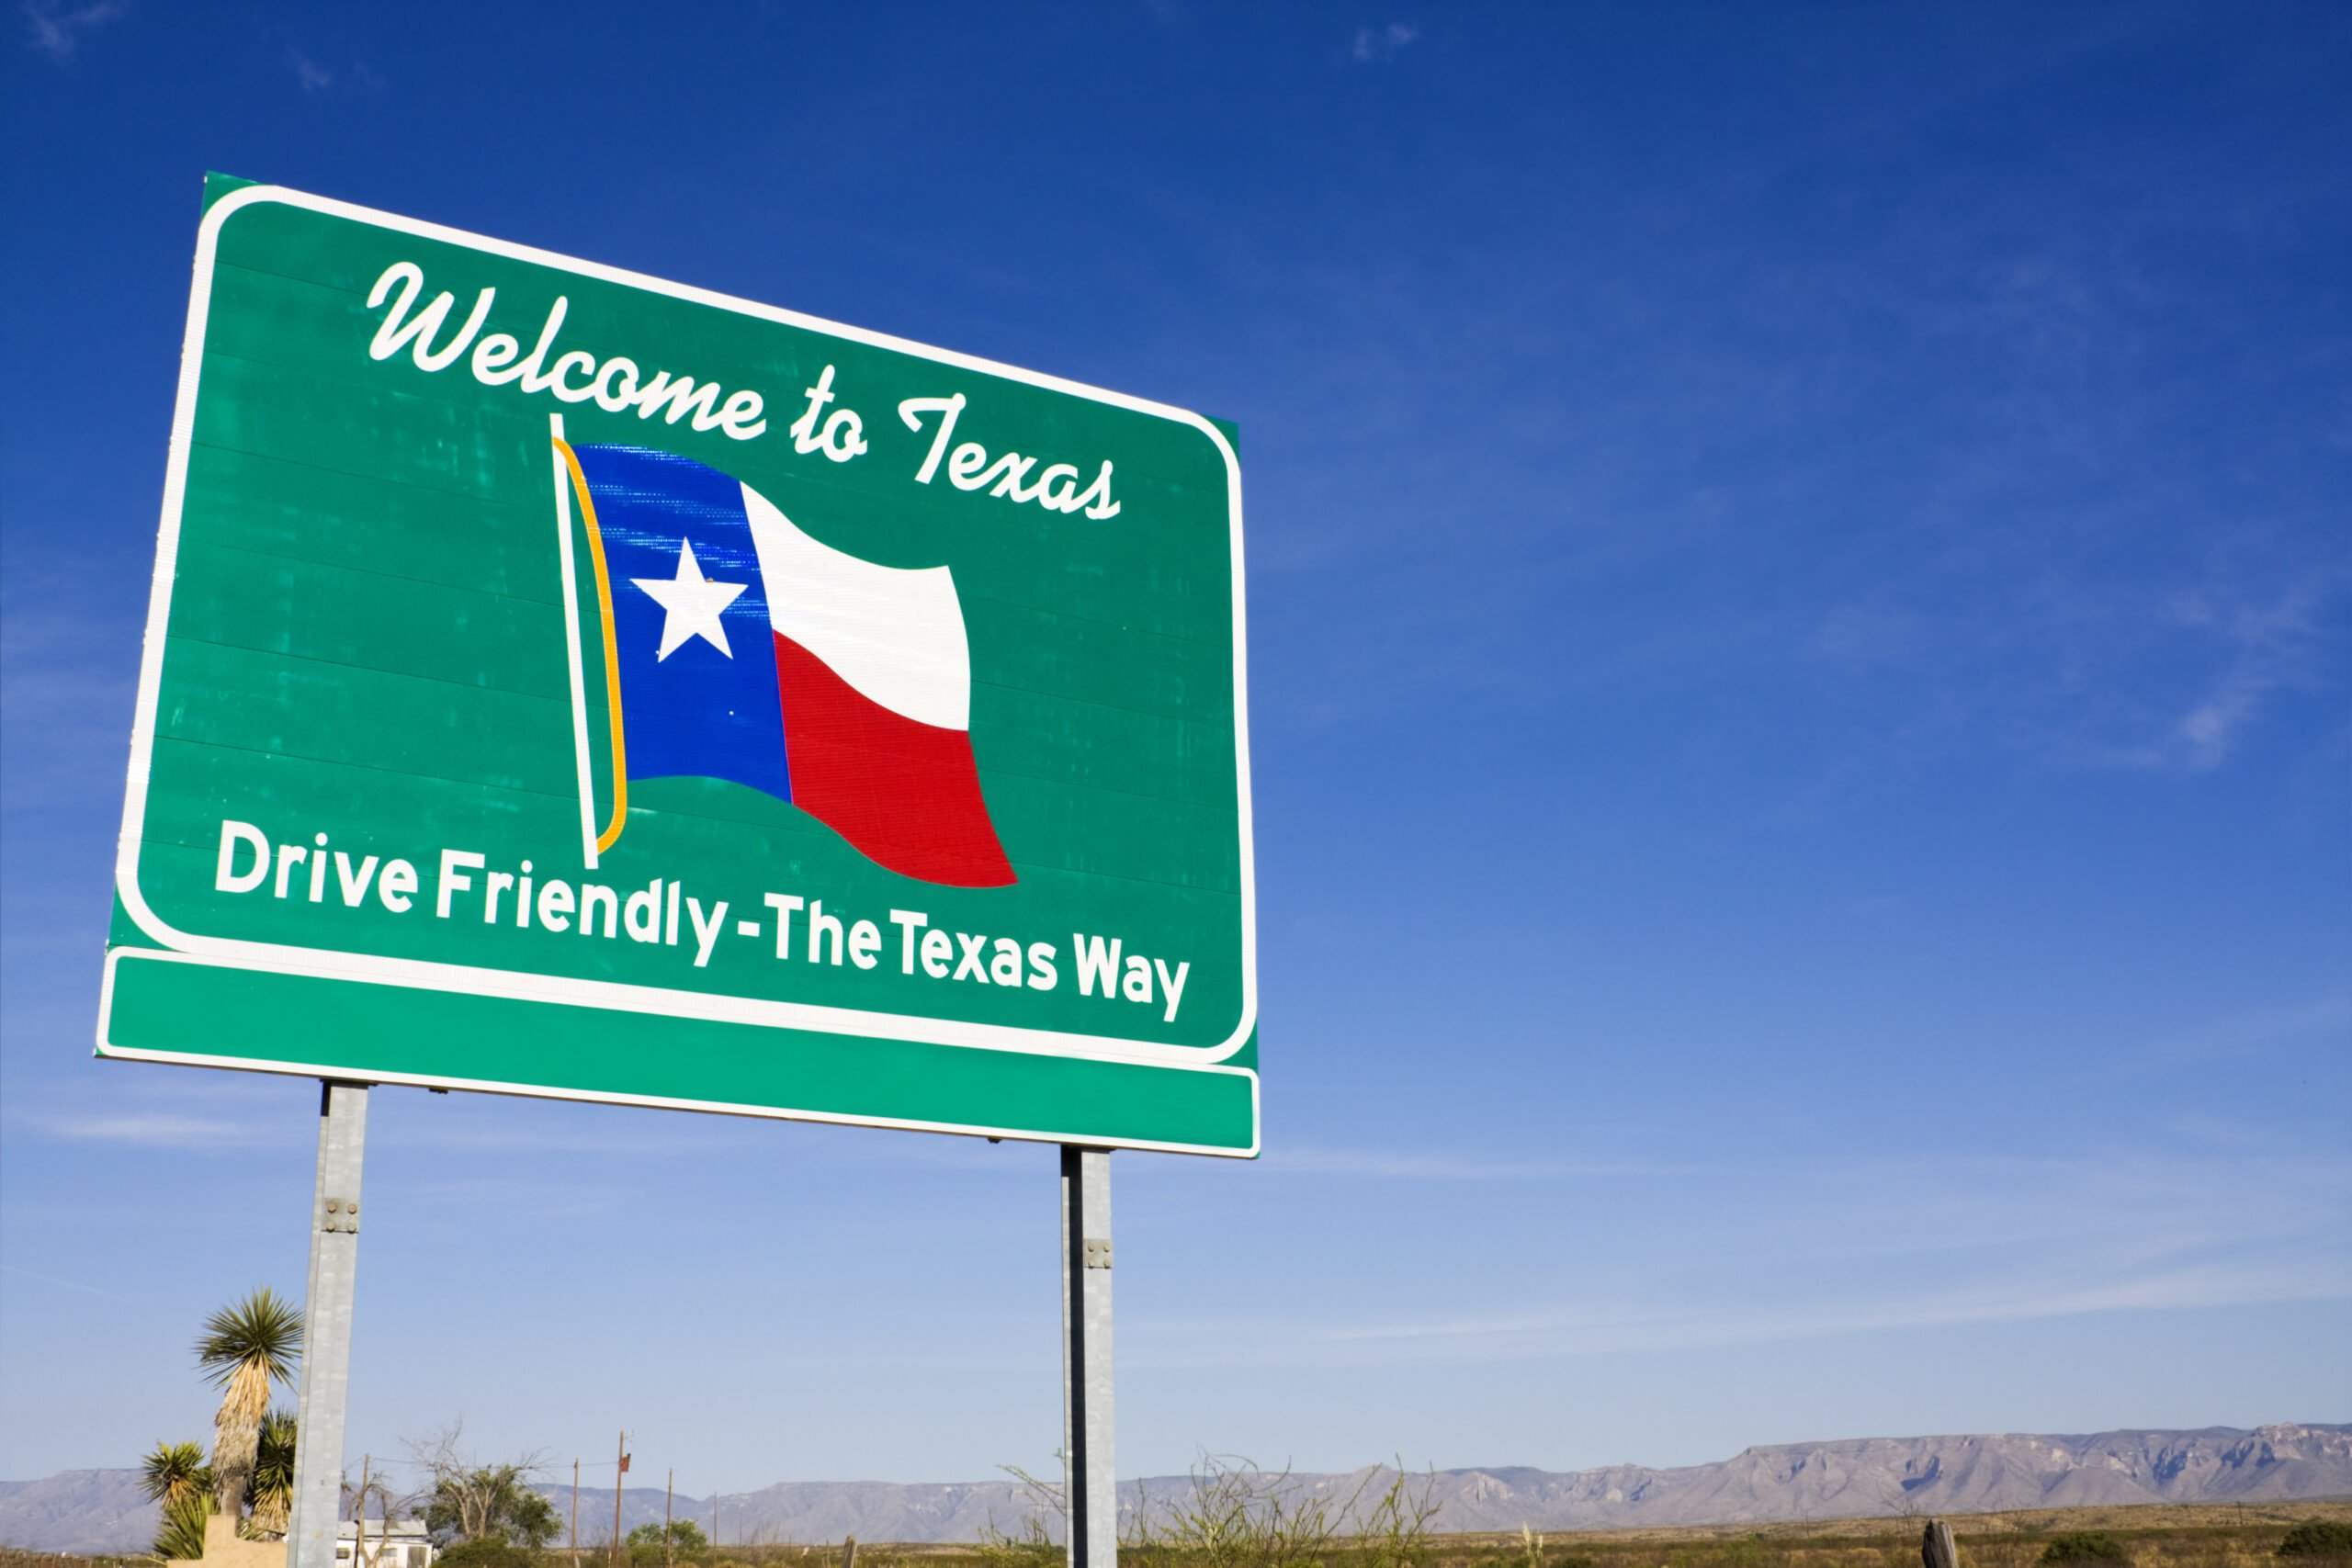 Welcome to Texas road sign alongside the highway